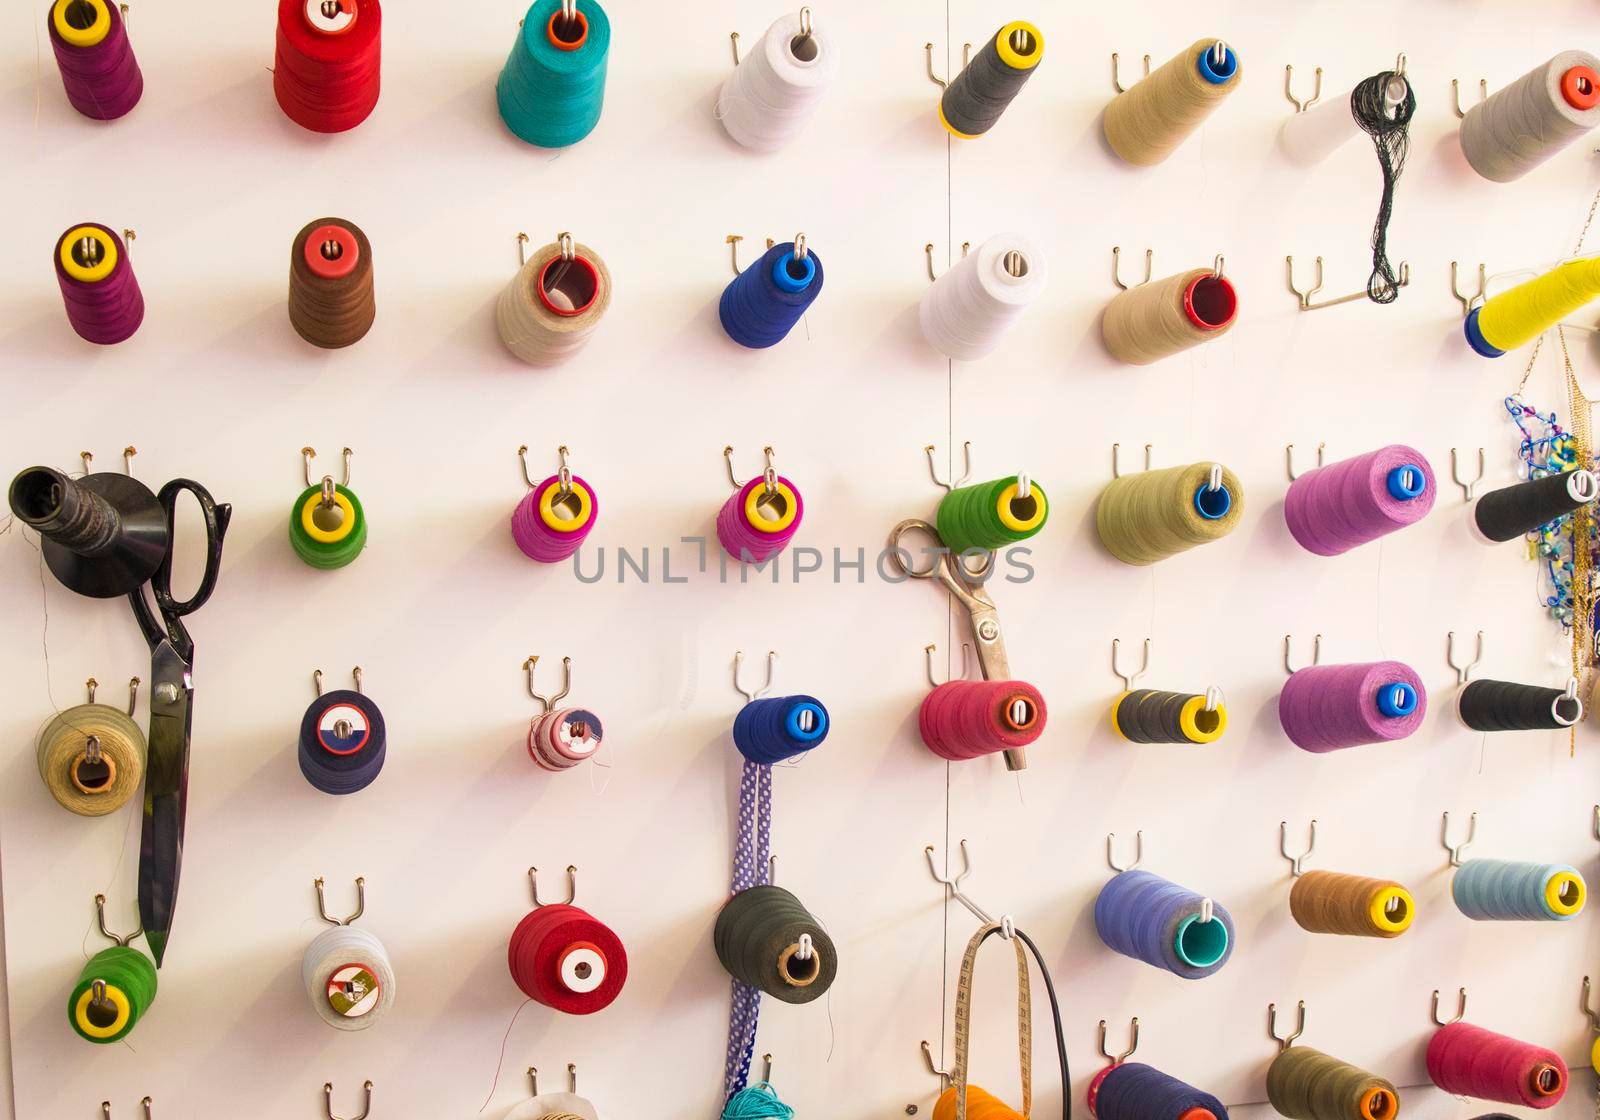 Multicolored coils and scissors on the wall. Workplace seamstresses